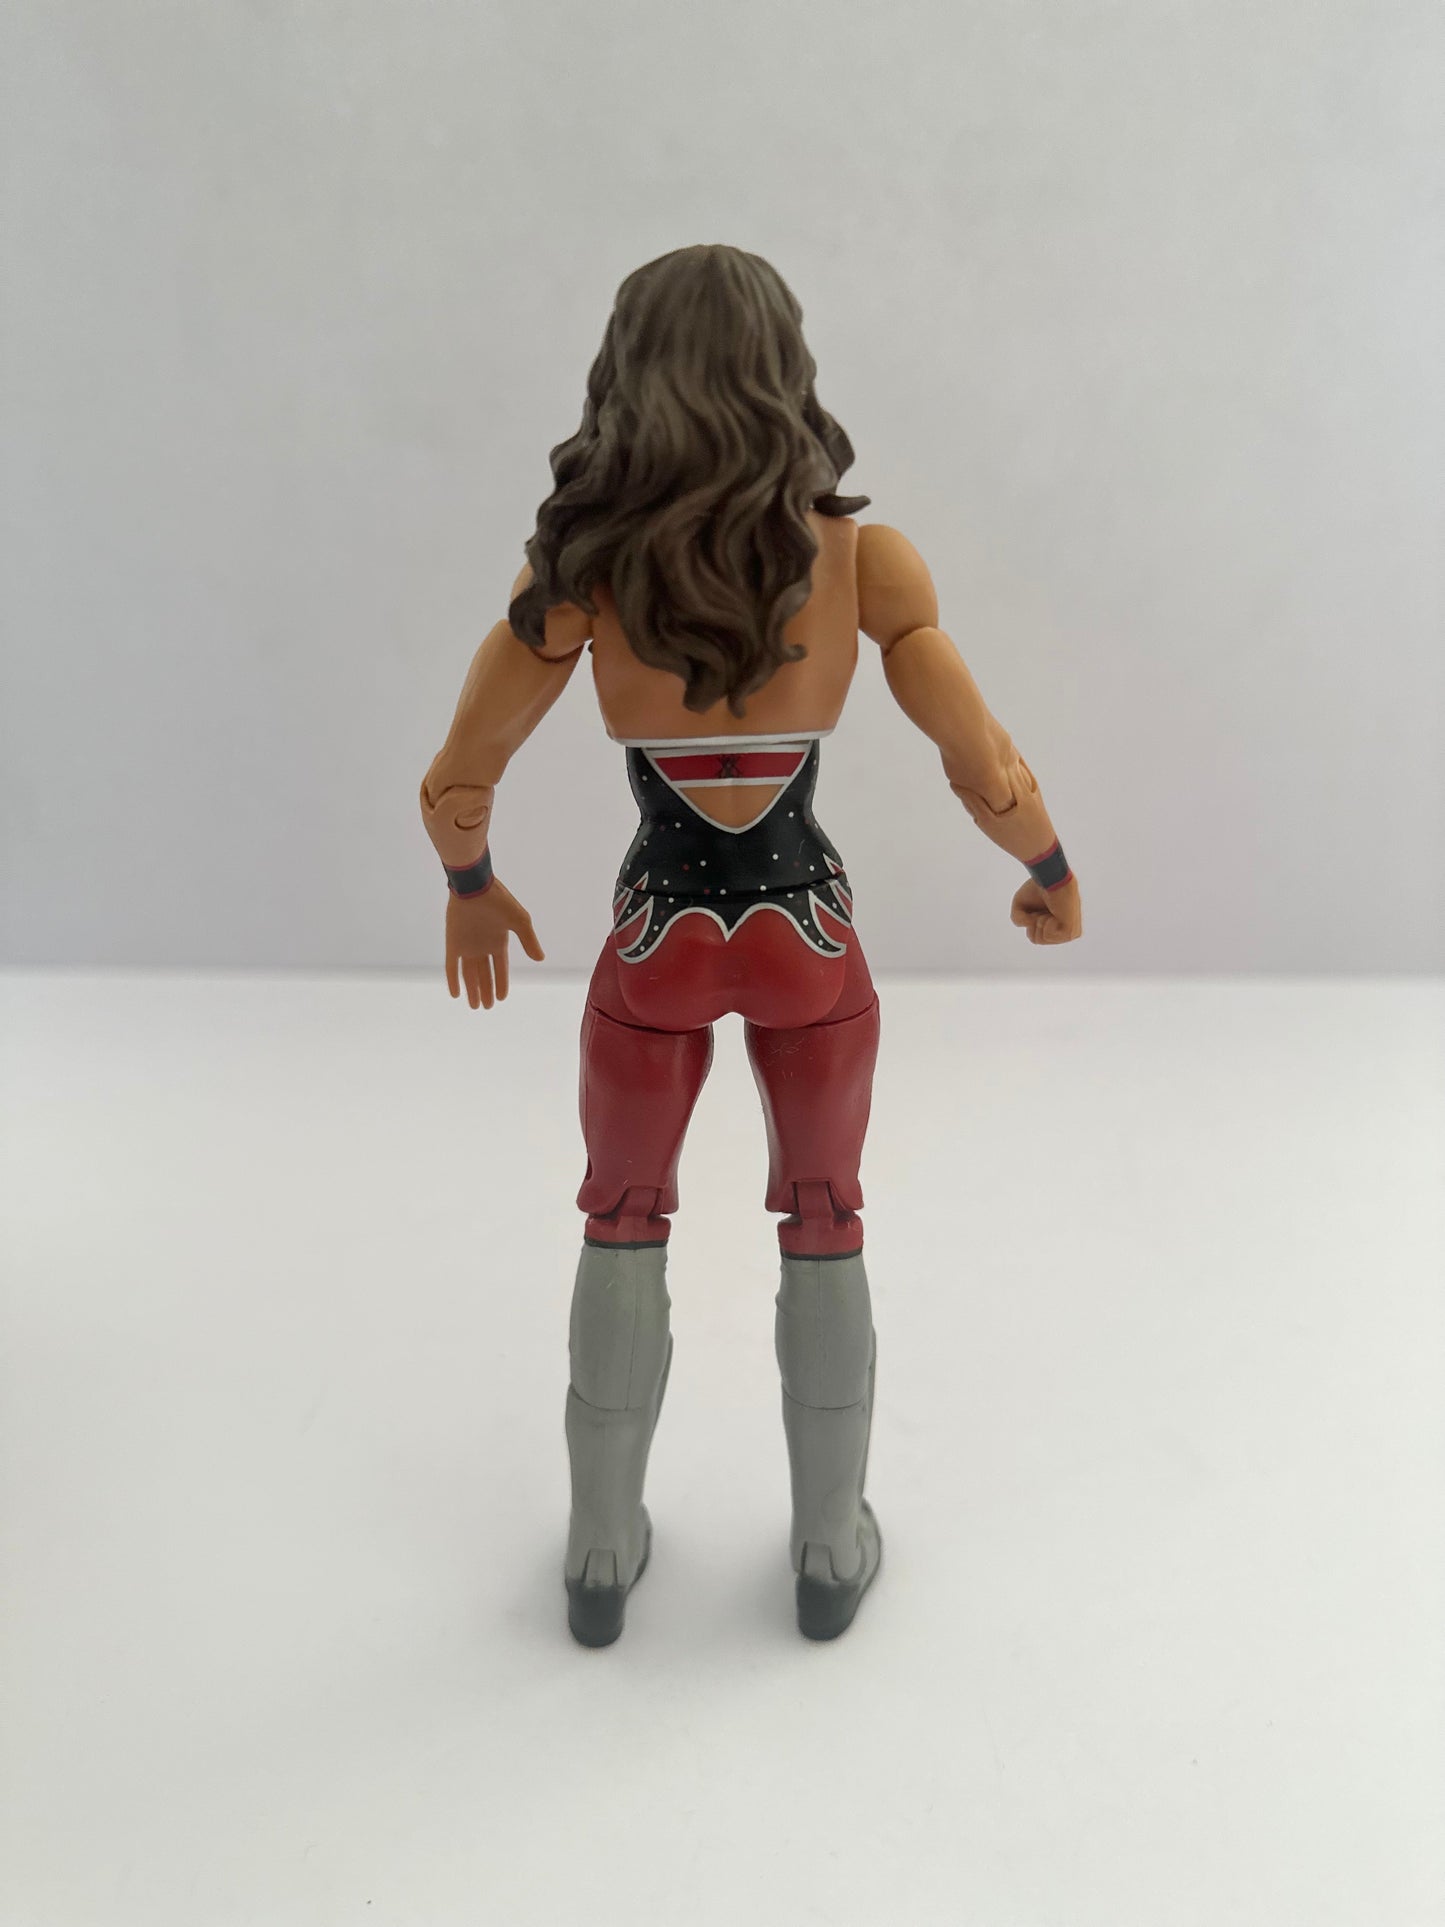 WWE Basic Series 33 Superstar #59 Tamina Snuka (First Time in the Line) 2013